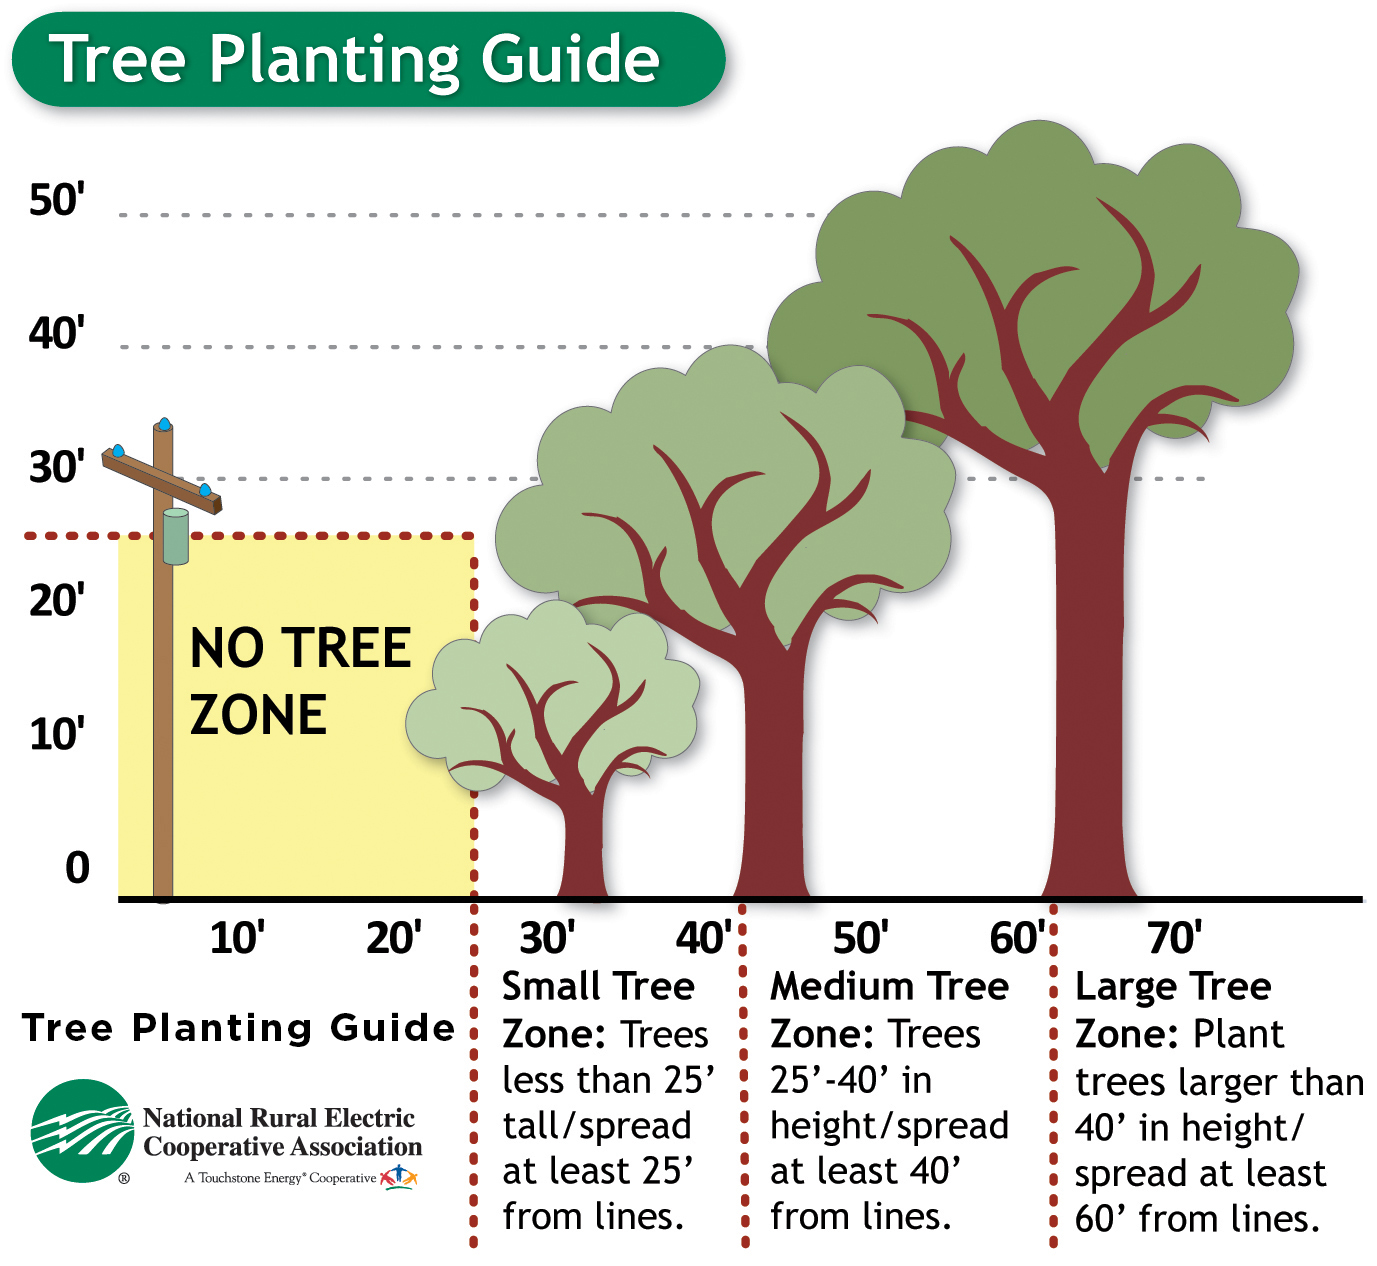 Tree Planting Guide. 0' to 25' from power lines - NO TREE ZONE. 30' to 40' from power lines - SmallTree Zone: Trees less than 25' tall/spread at least 25' from lines. 40' to 50' from power lines - Medium Tree Zone: Trees 25'-40' in height/spread at least 40' from lines. 60'+ from power lines - Large Tree Zone: Plant trees larger than 40' in height/spread at leas 60' from lines.